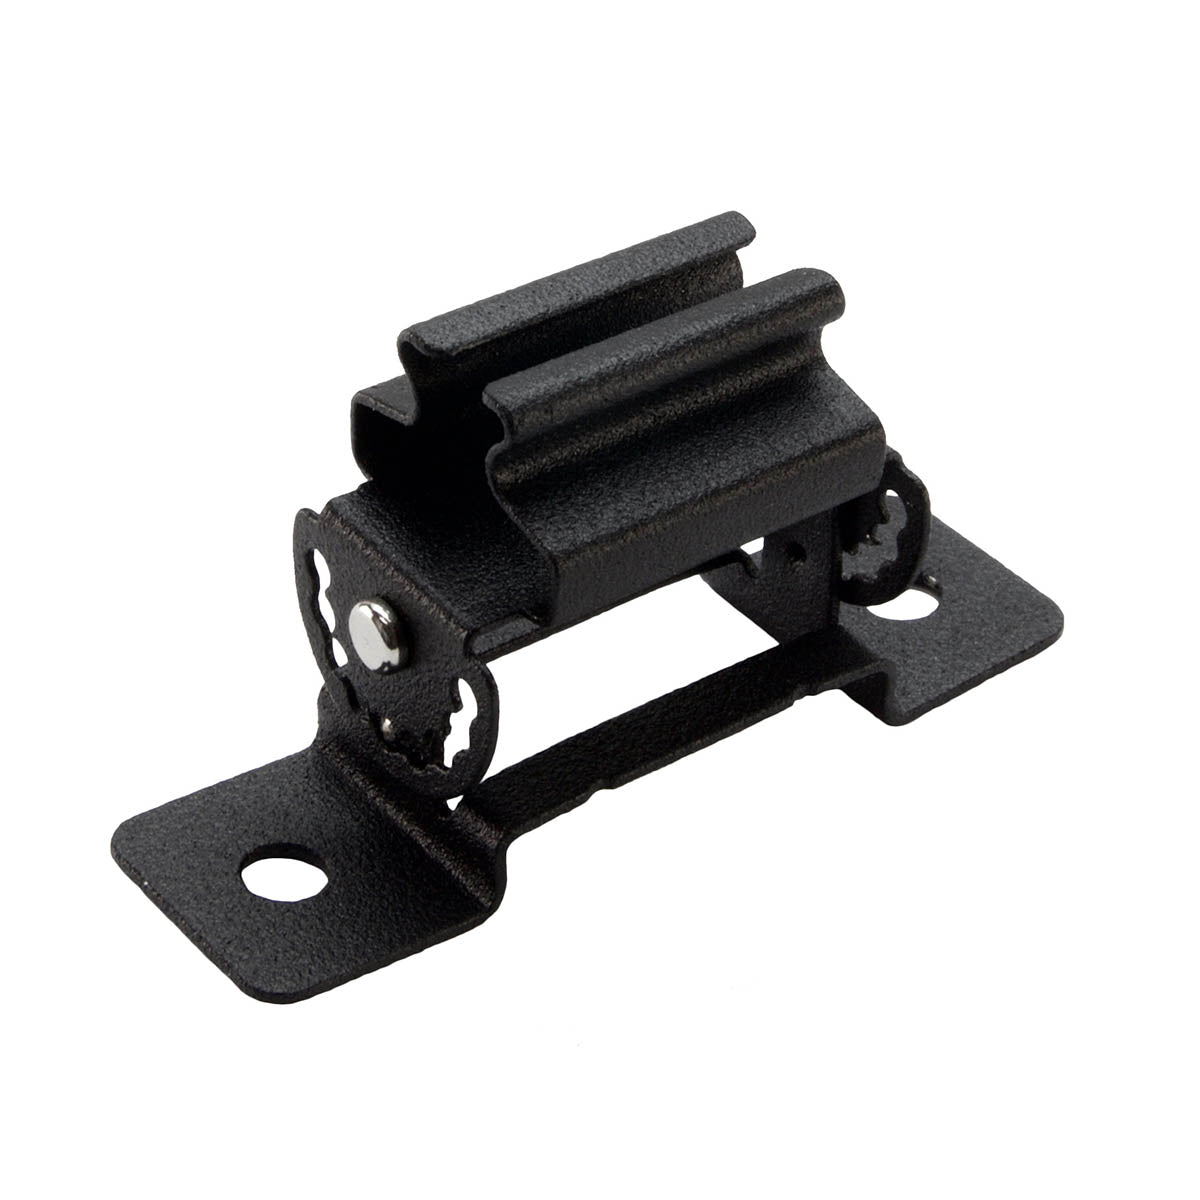 Black Rotating Mounting Clips for Square, 45°, and DUO Channels, Pack of 2